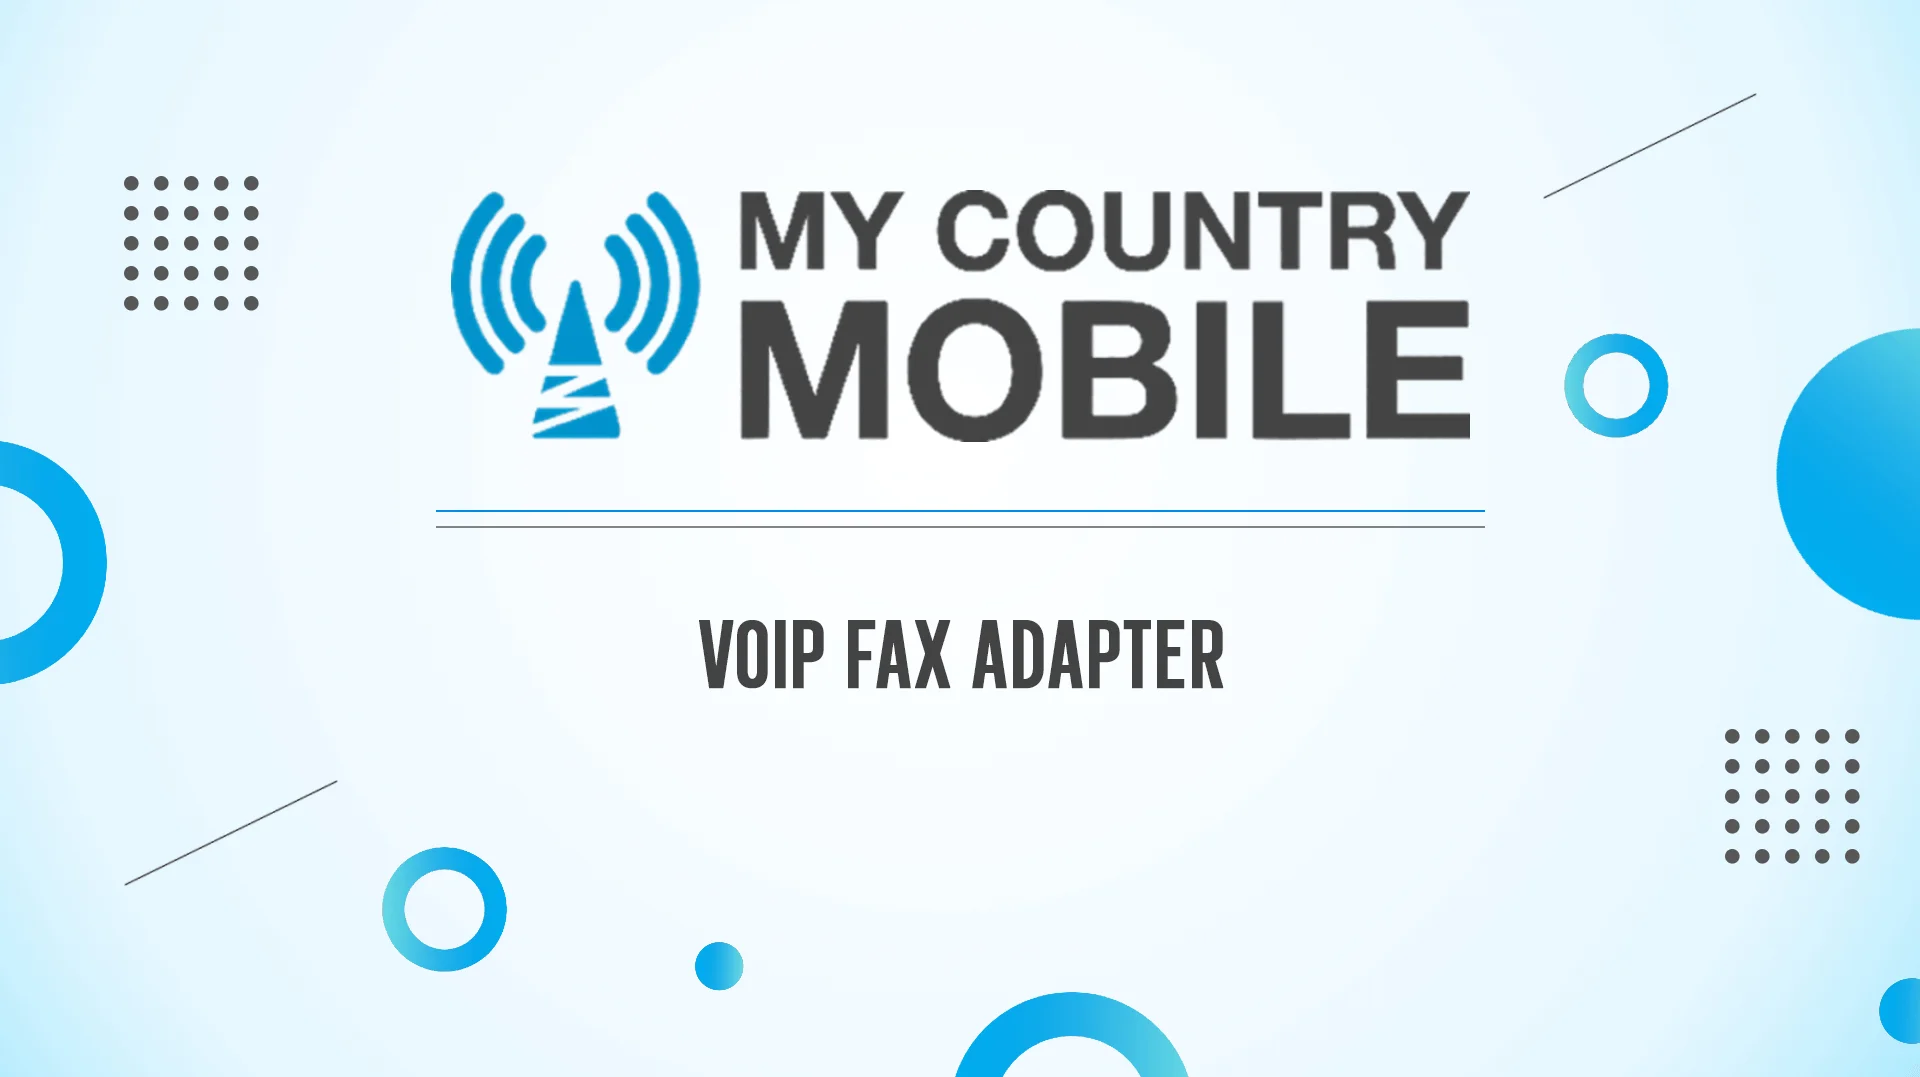 VoIP Fax Adapter